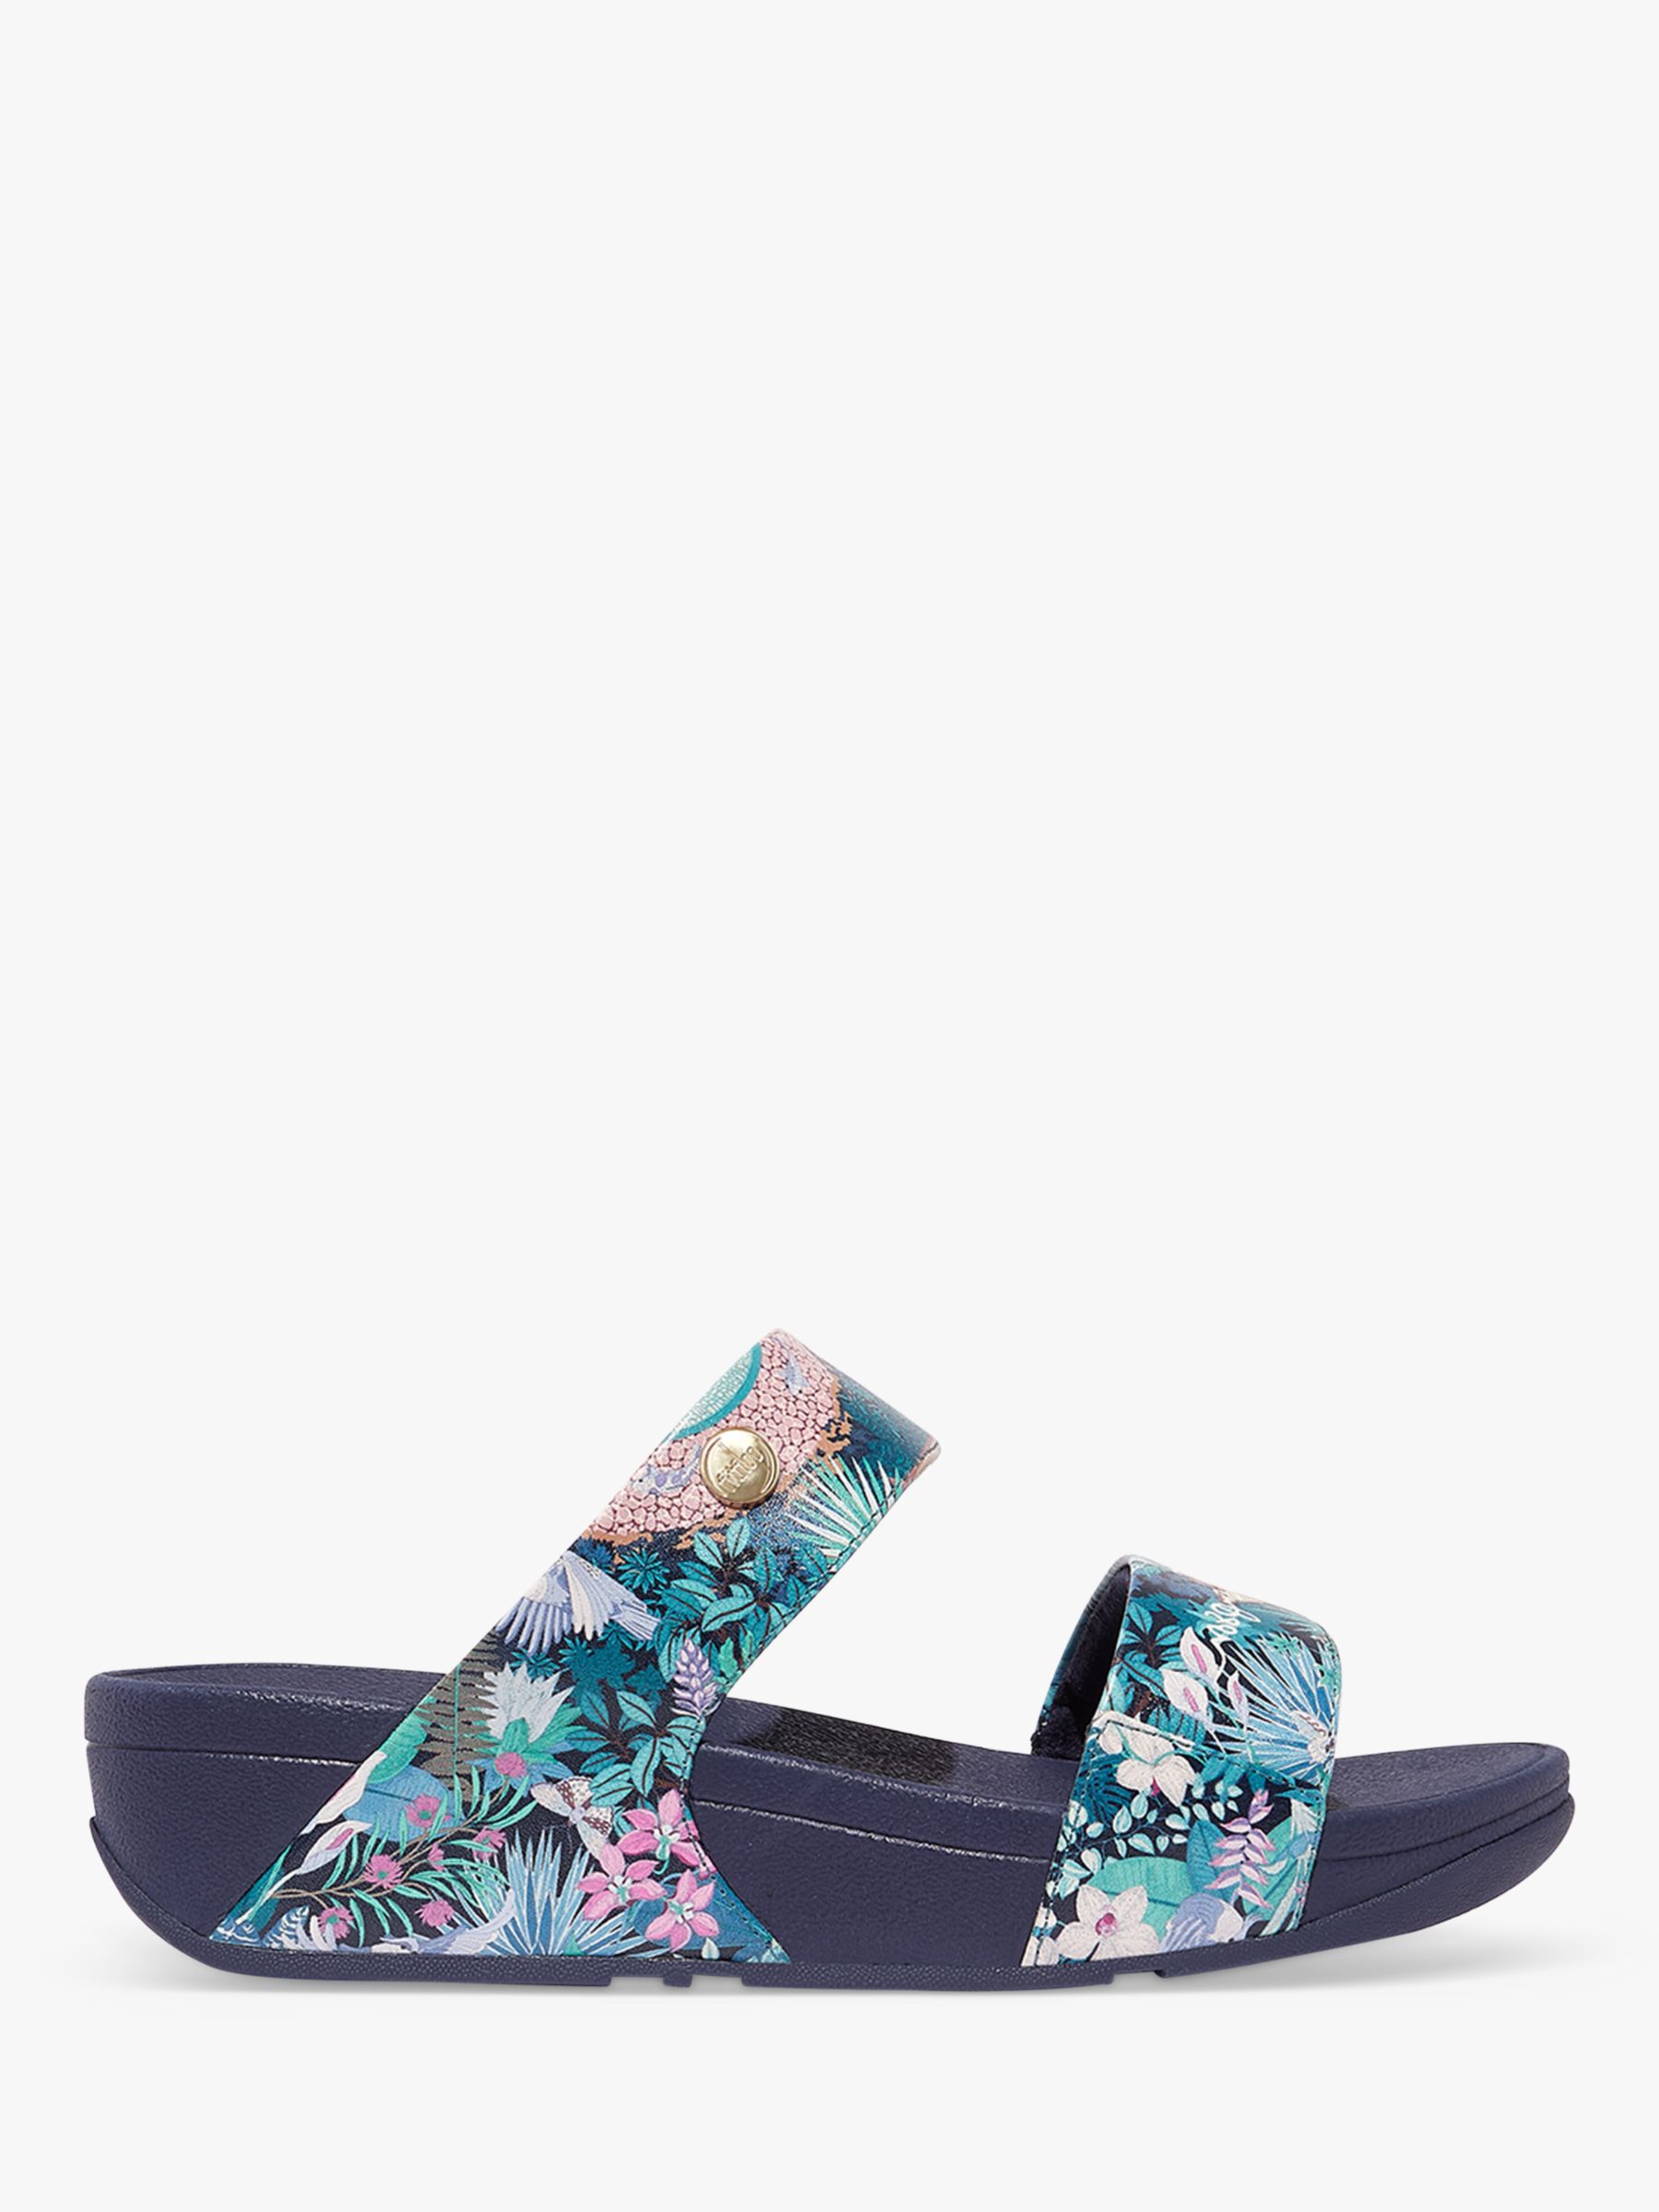 FitFlop Jim Thompson Lulu Floral Leather Sandals, Heritage Blue, 8